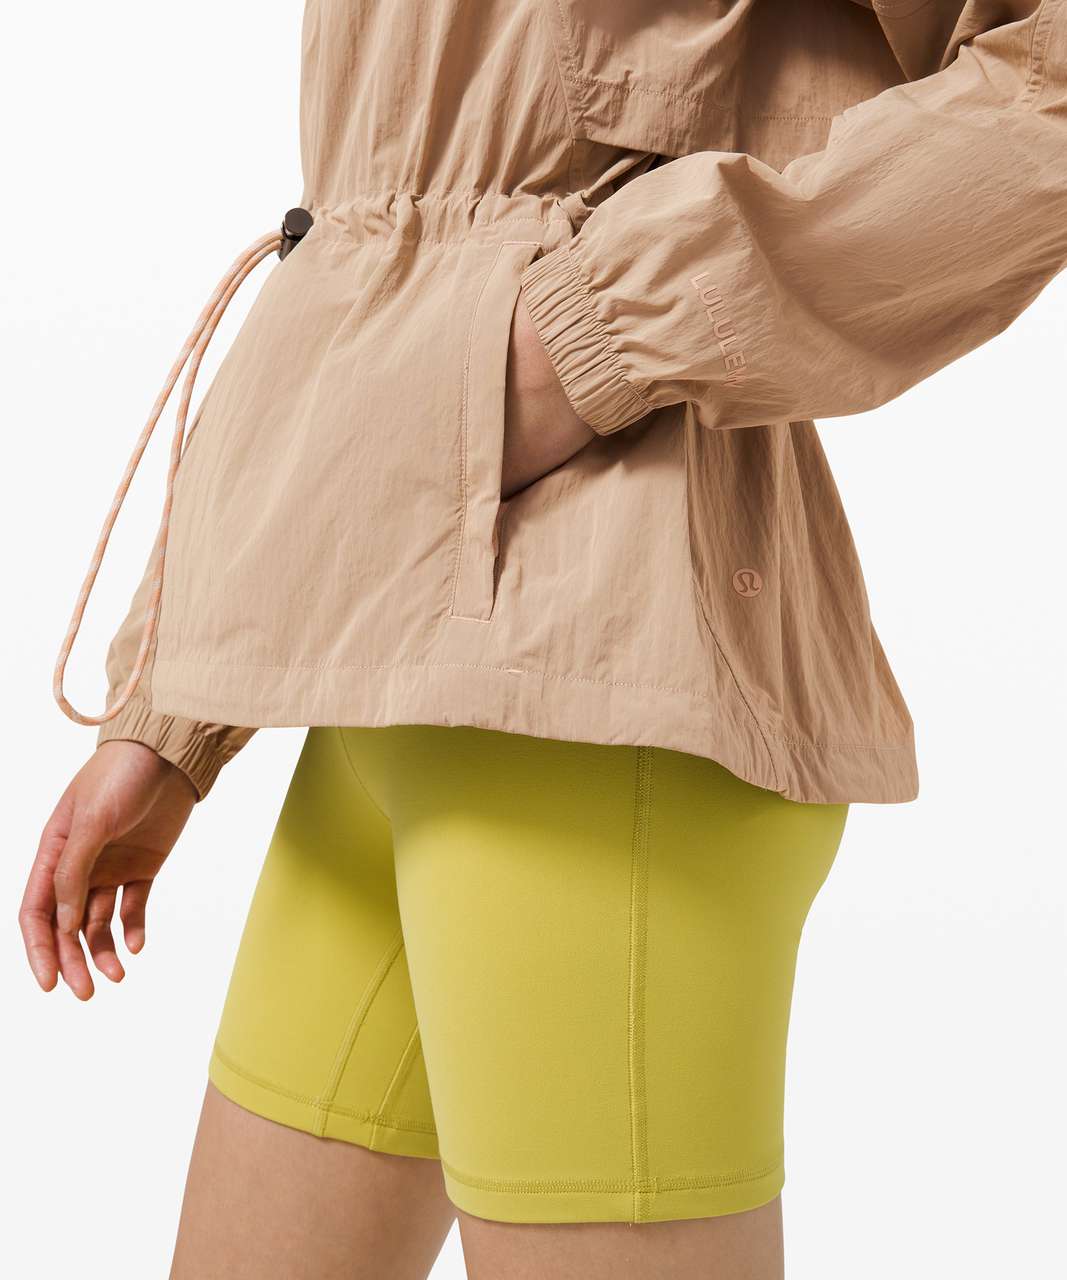 This $158 Lululemon jacket is 'perfect' for weird fall weather